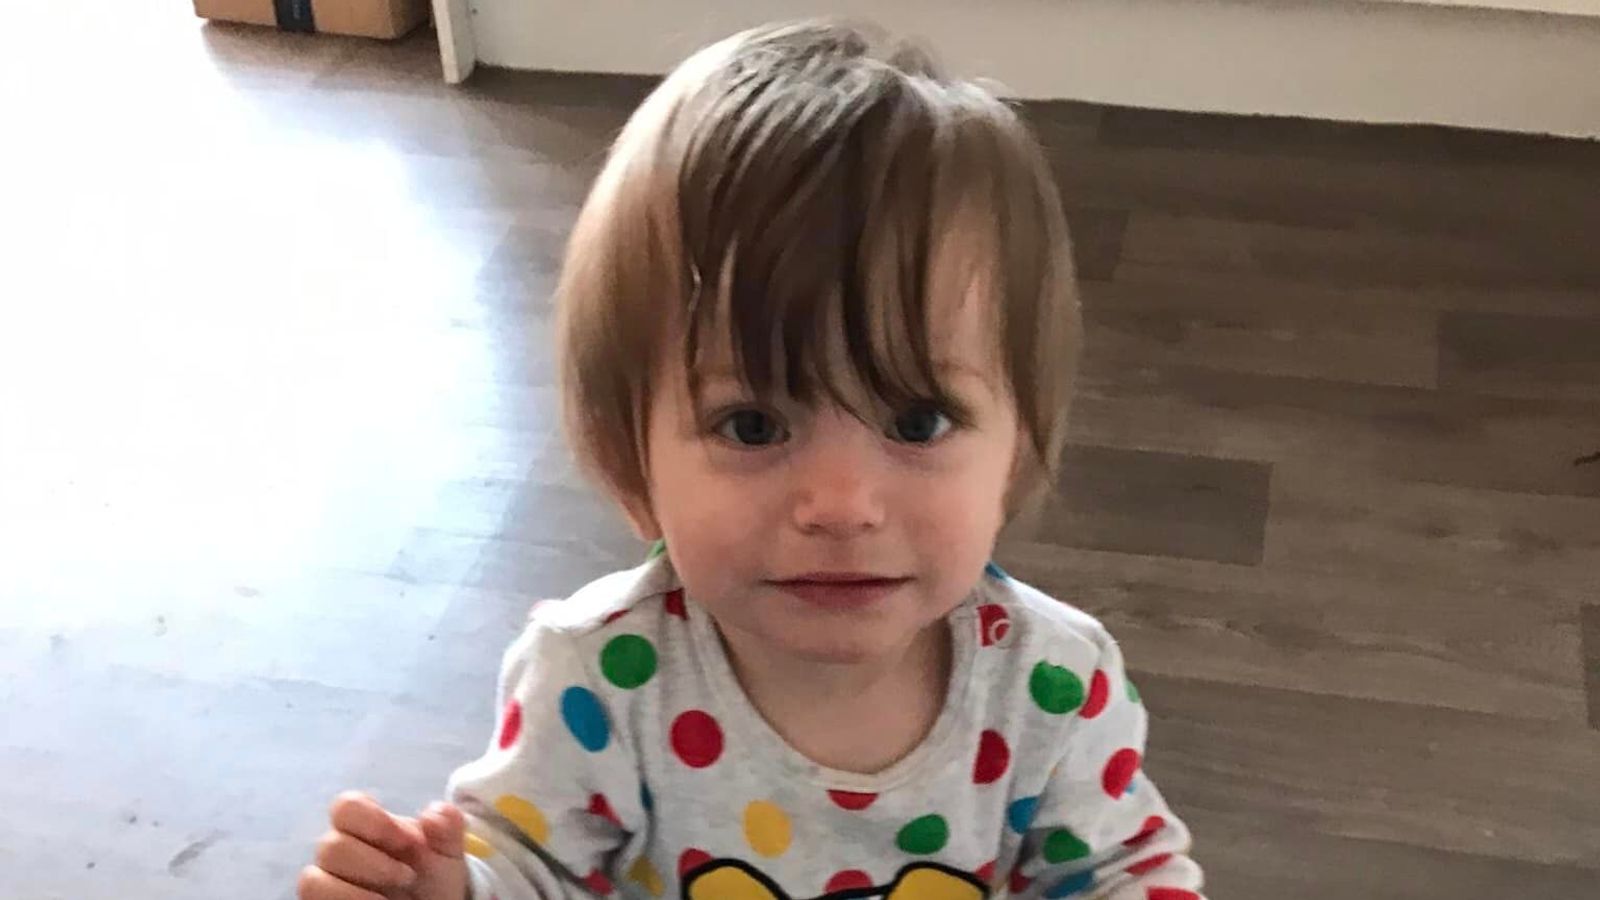 Skegness: Police watchdog to investigate 'any missed opportunities' after toddler Bronson Battersby and father found dead